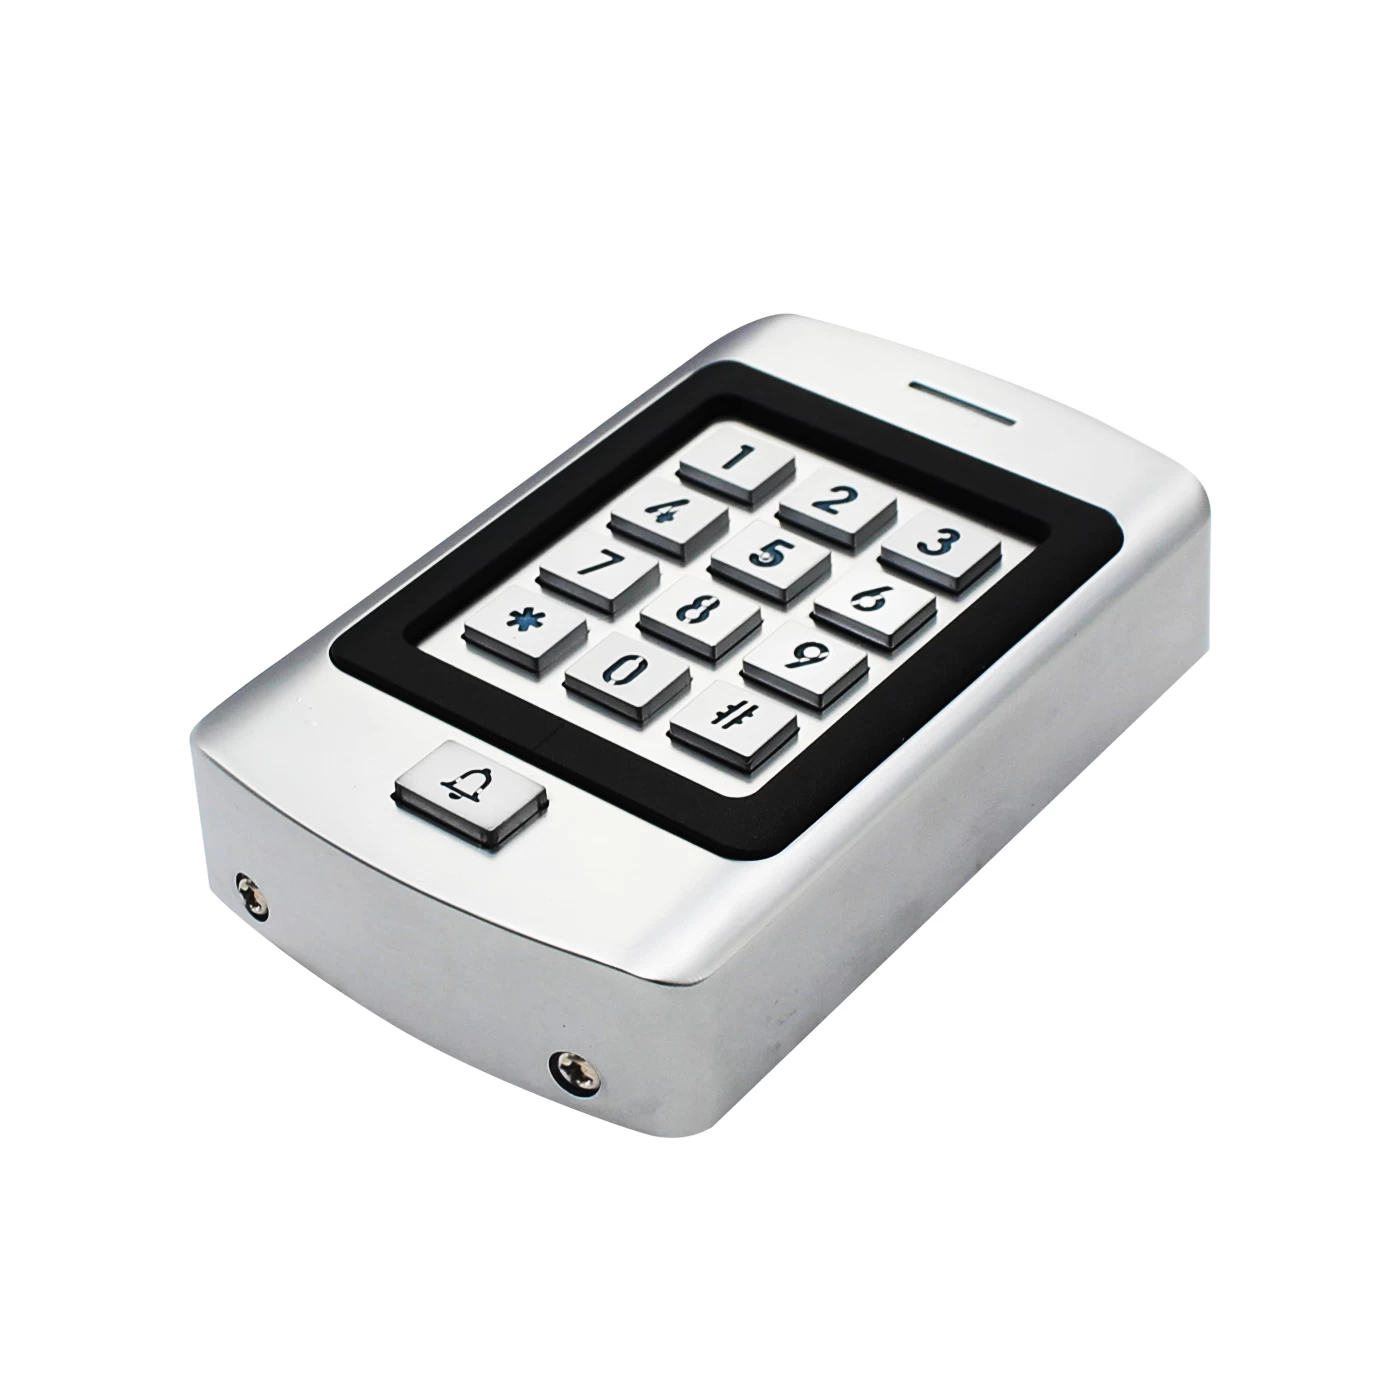 ACM-208D IP66 Metal 125KHz RFID Proximity Keypad Reader Access Control Keyboards with Doorbell